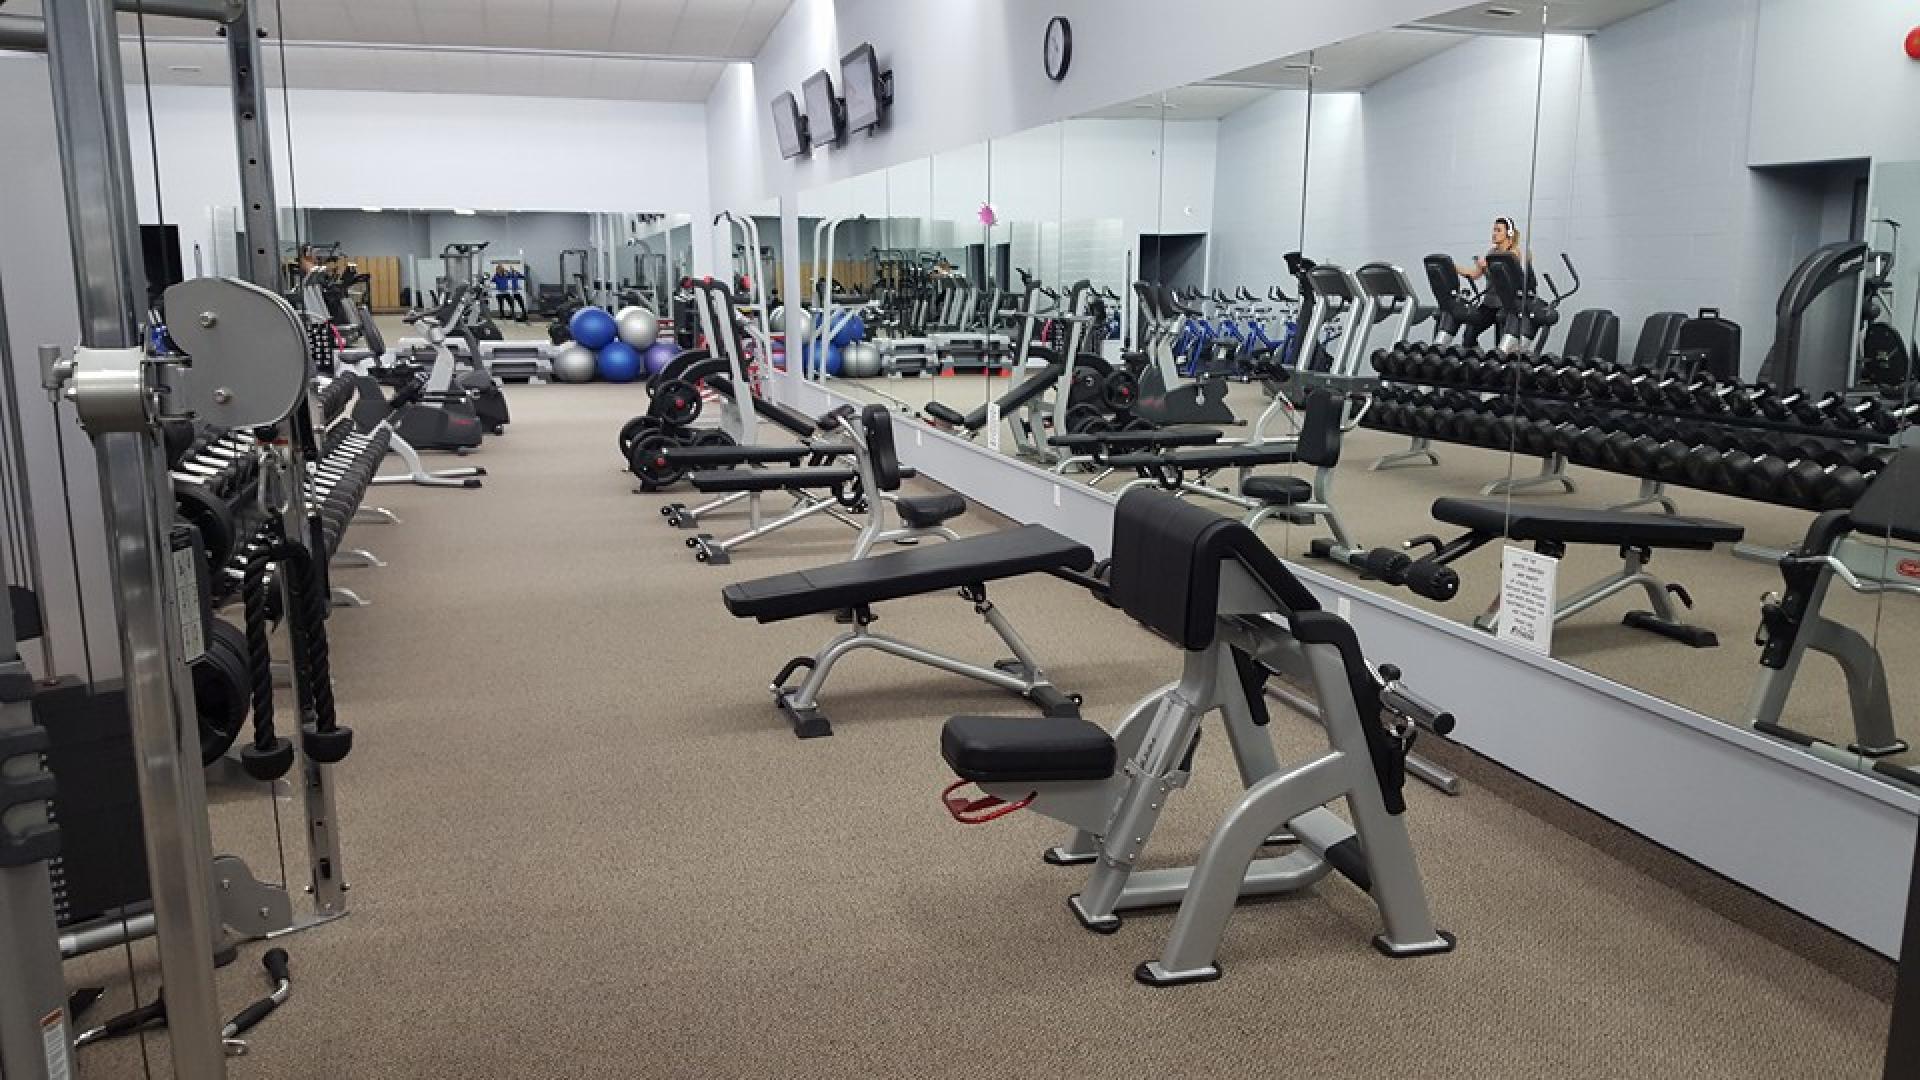 Interior of fitness centre. There are some weight benches throughout the room.